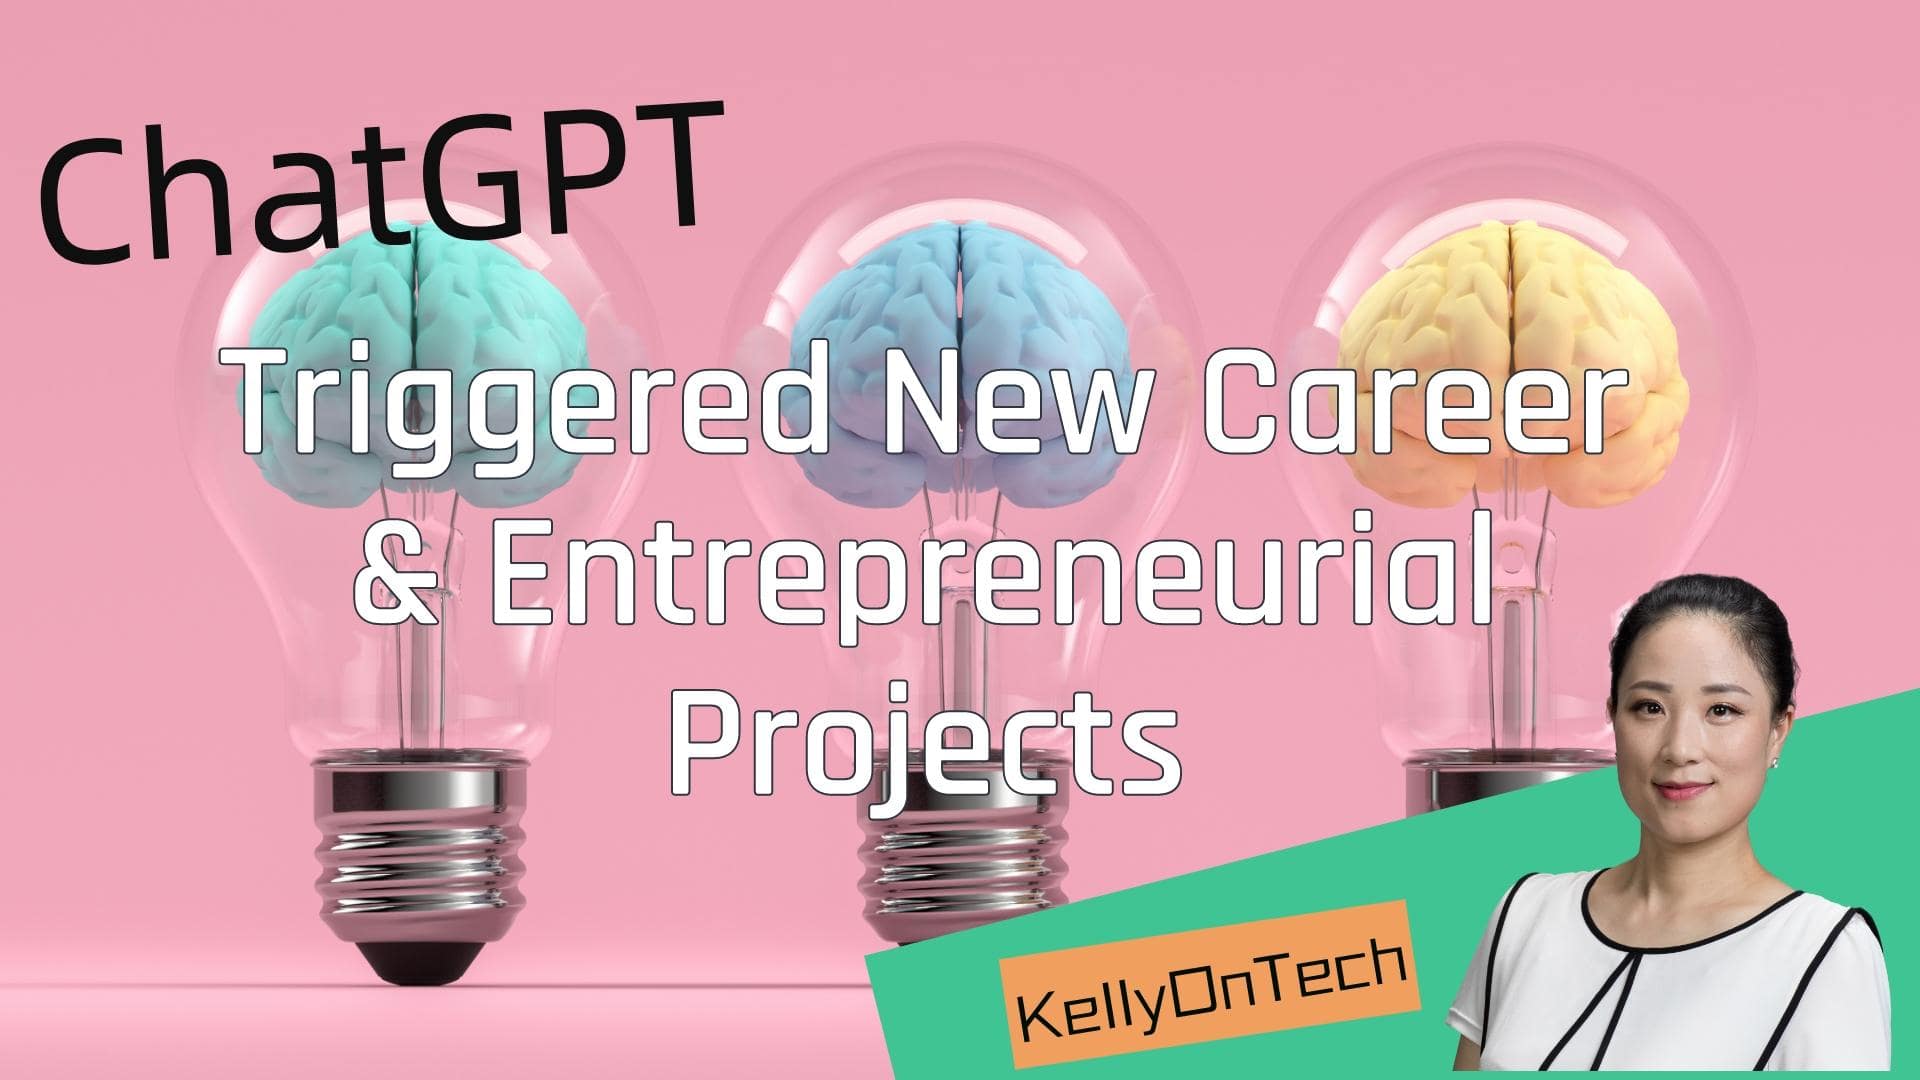 ChatGPT triggered new career and entrepreneurial projects KellyOnTech